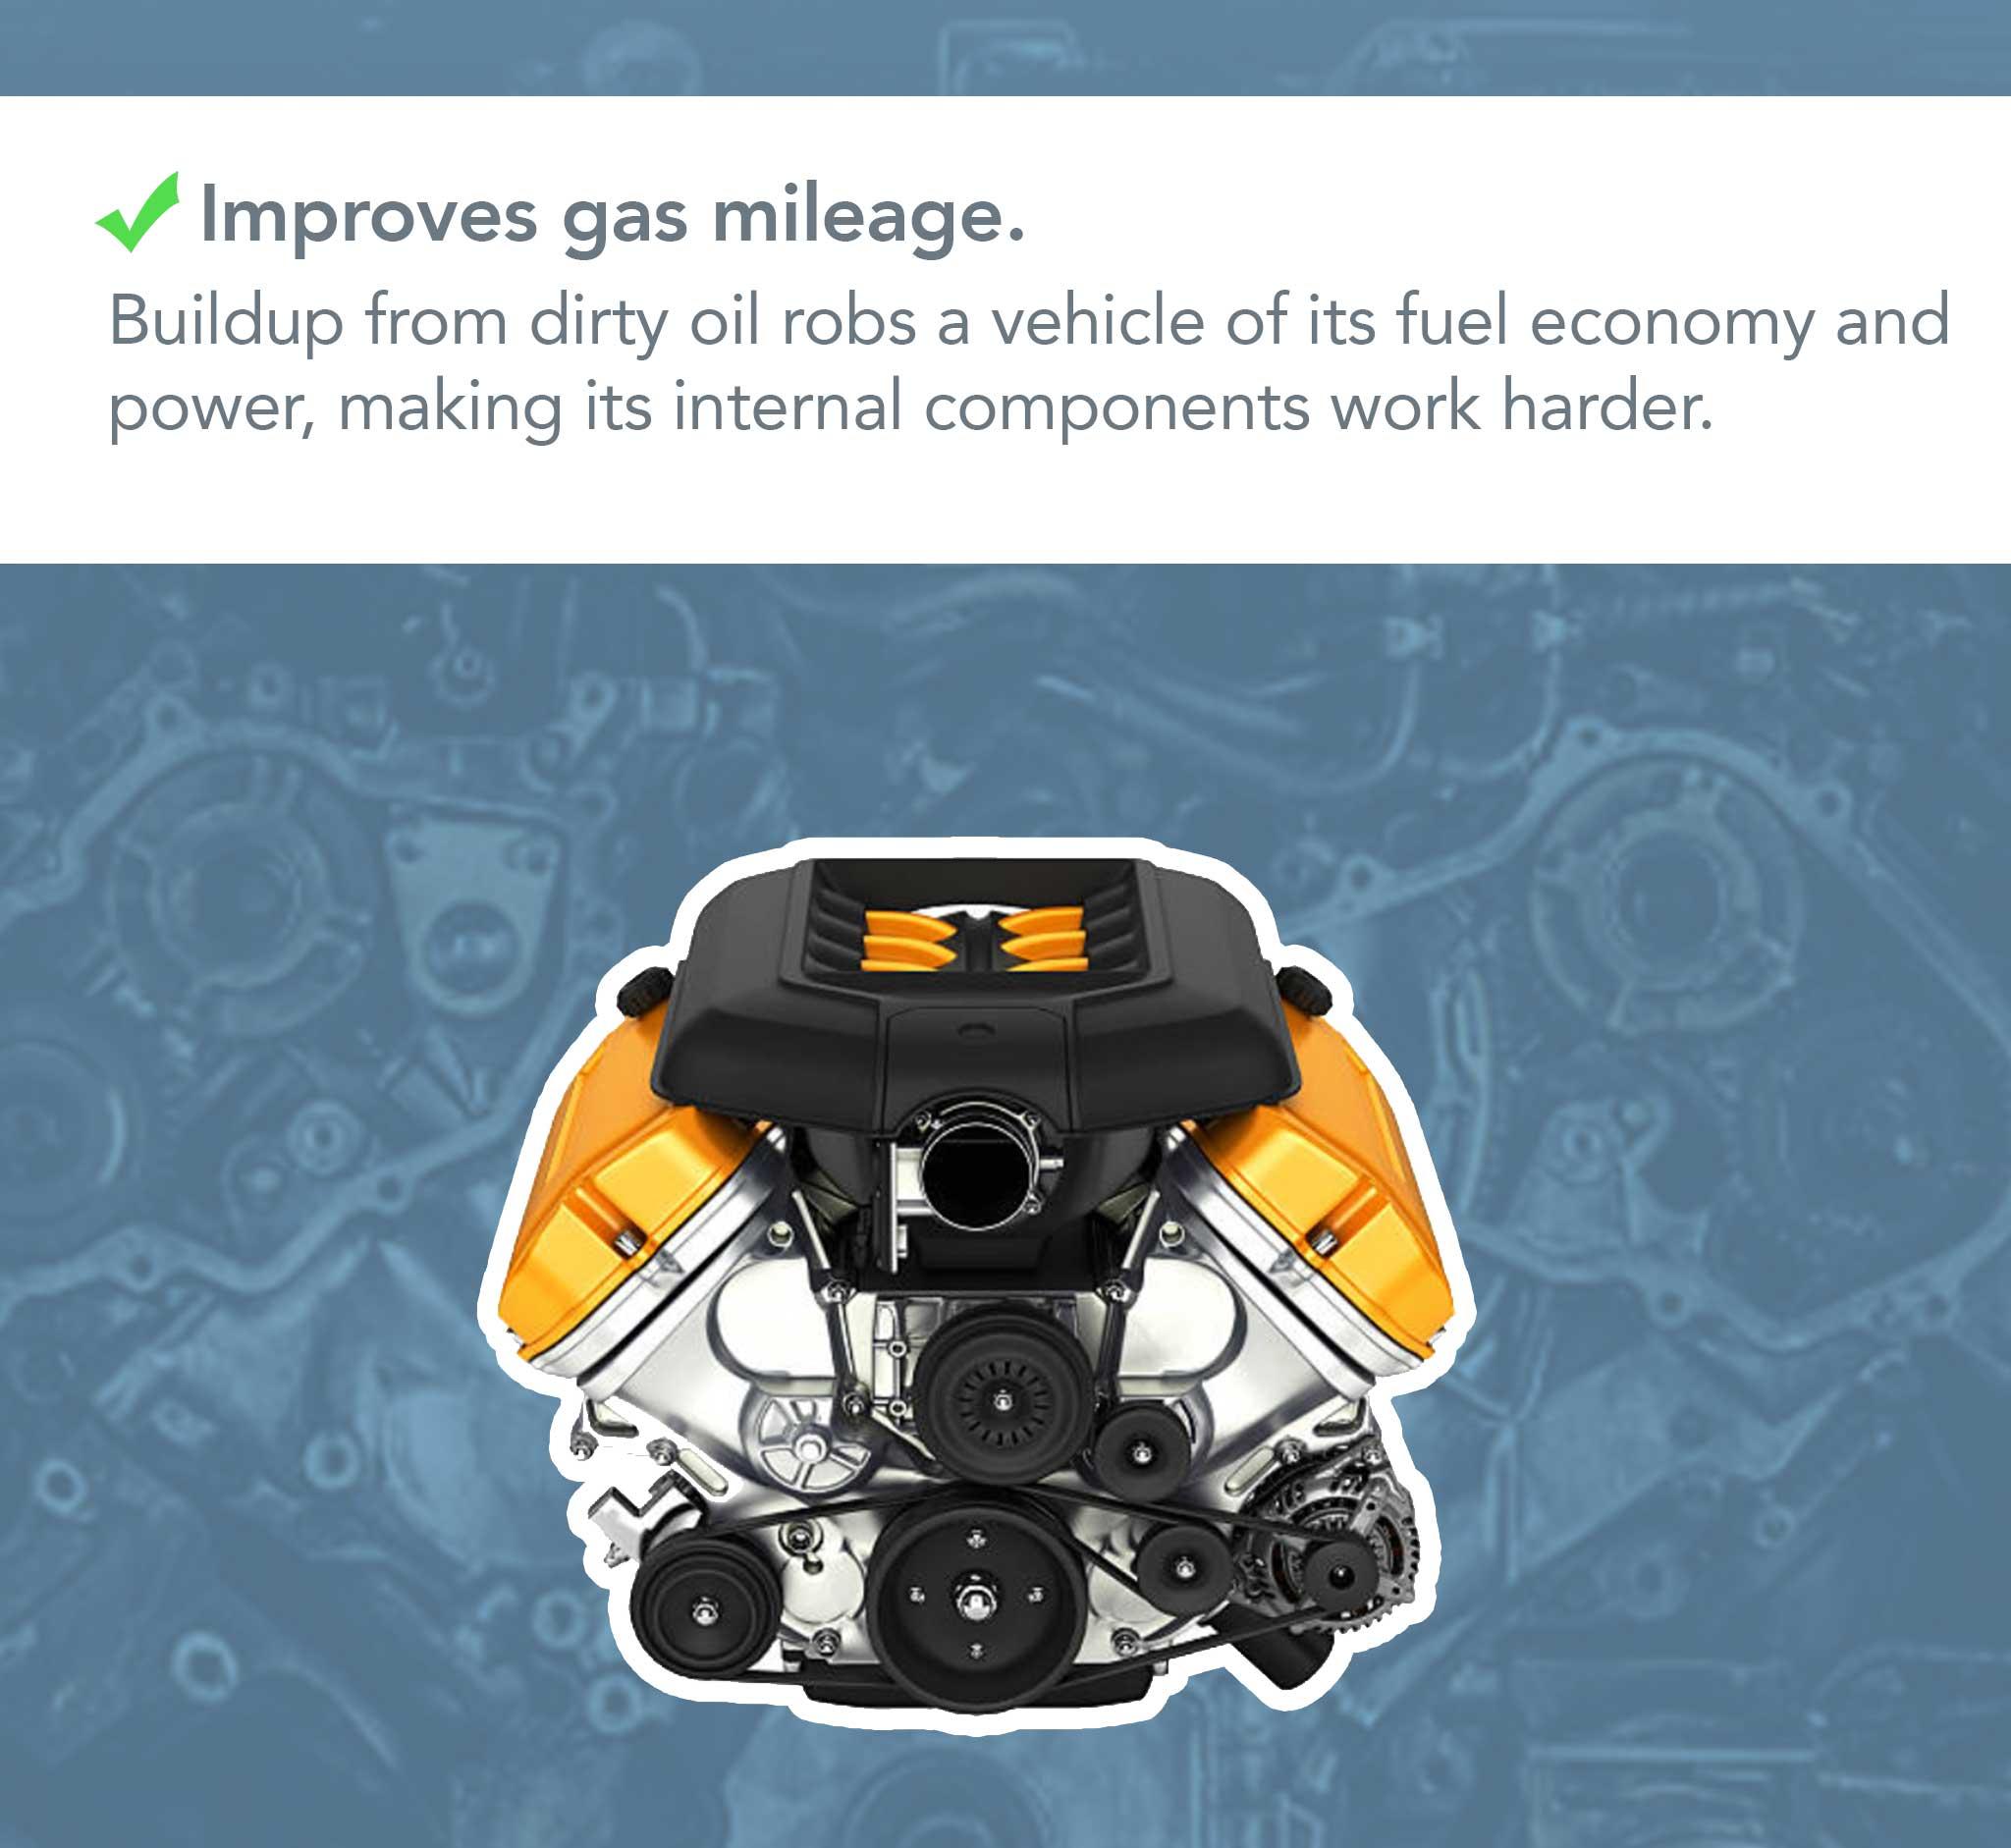 Buildup from dirty oil robs a vehicle of its fuel economy and  power, making its internal components work harder.